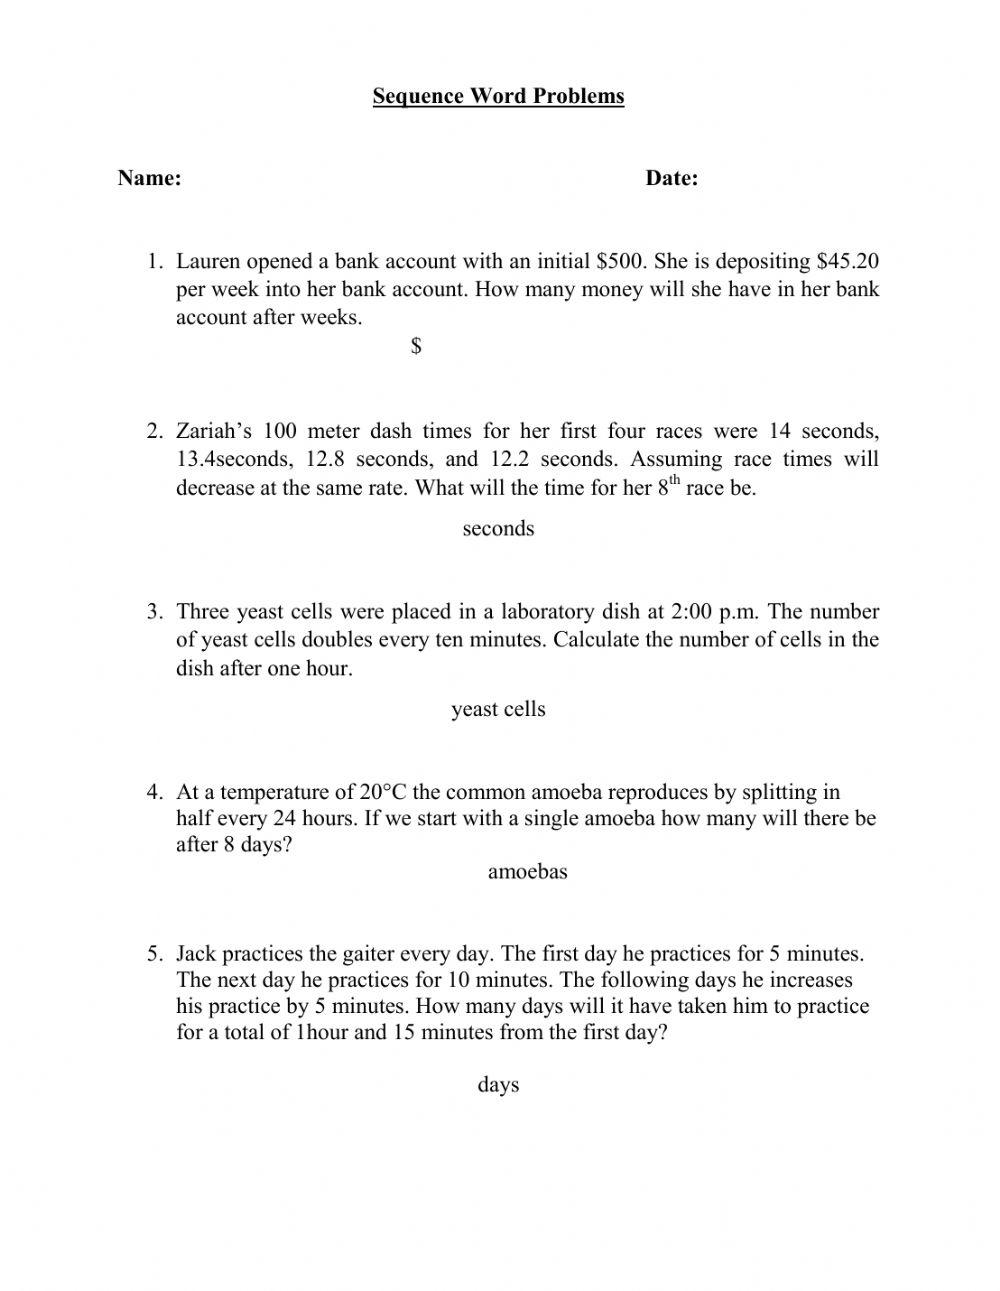 Sequence Word Problems